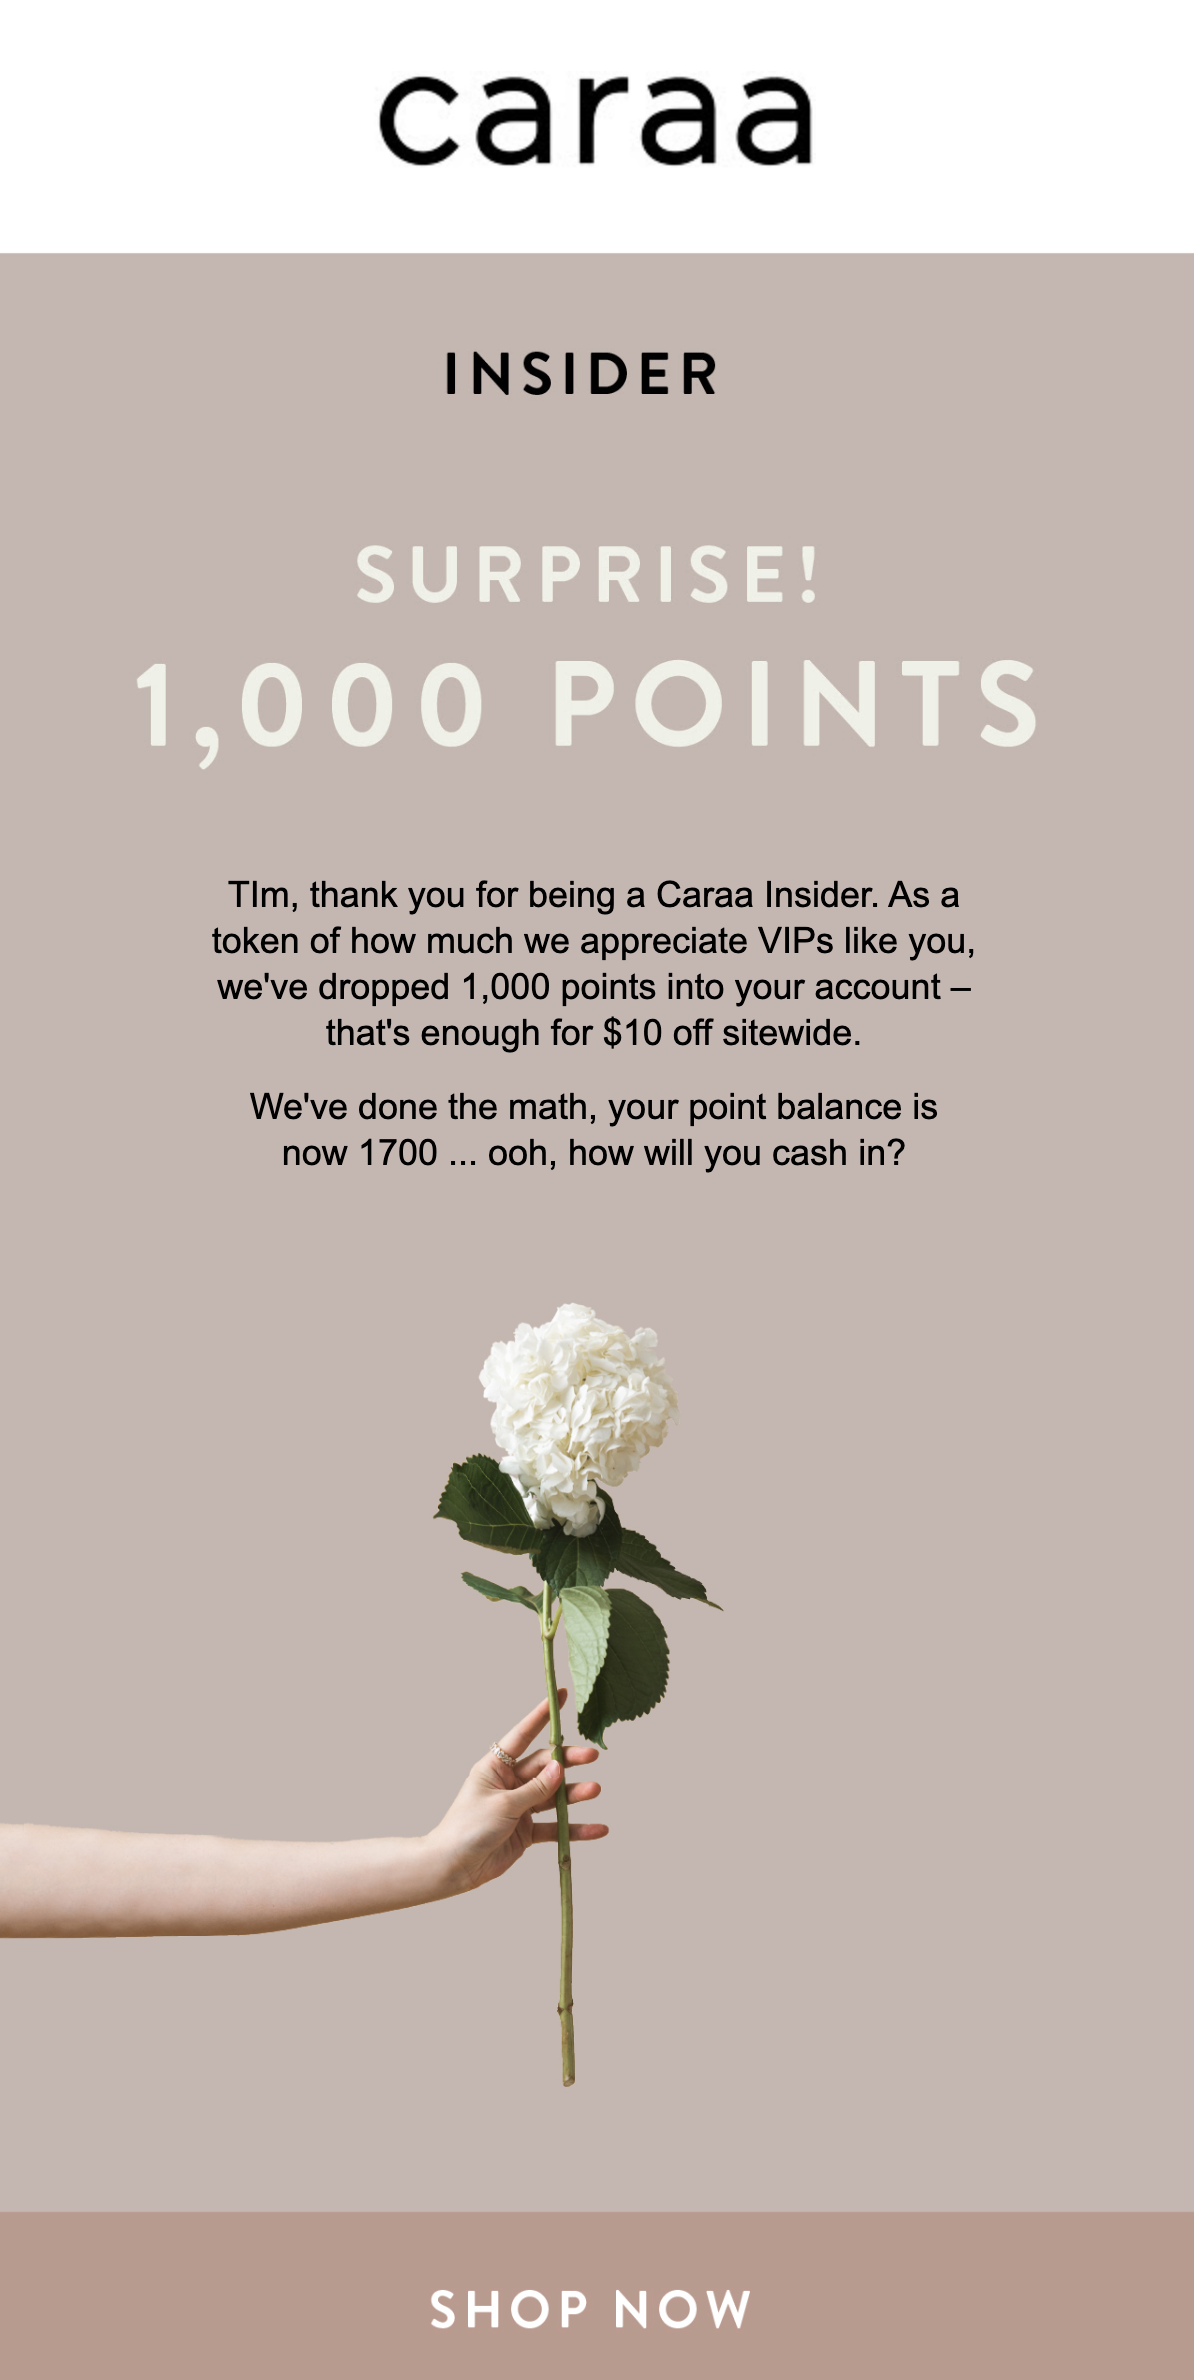 Best Loyalty Program Email Examples–A screenshot of an email from Caraa offering readers 1,000 points. The email is a plain brown background with a hand holding a white flower in the middle of it. The title is, "Insider. Surprise! 1,000 Points" and the message thanks the reader for their loyalty and offers 1,000 bonus points, equivalent to $10 off. 